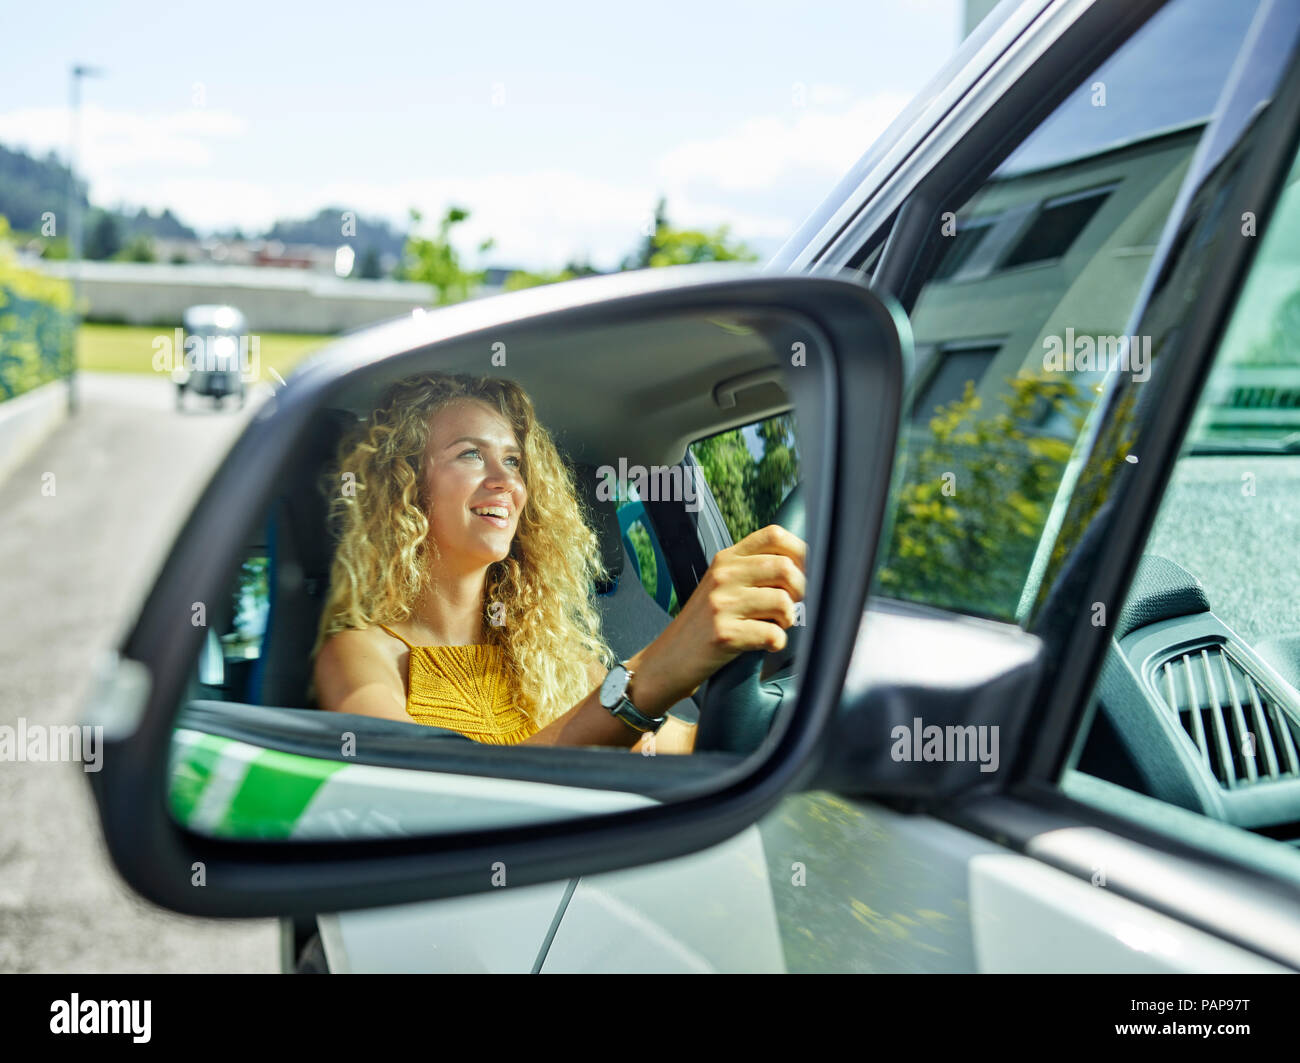 Reflection in wing mirror of smiling woman driving electric car Stock Photo